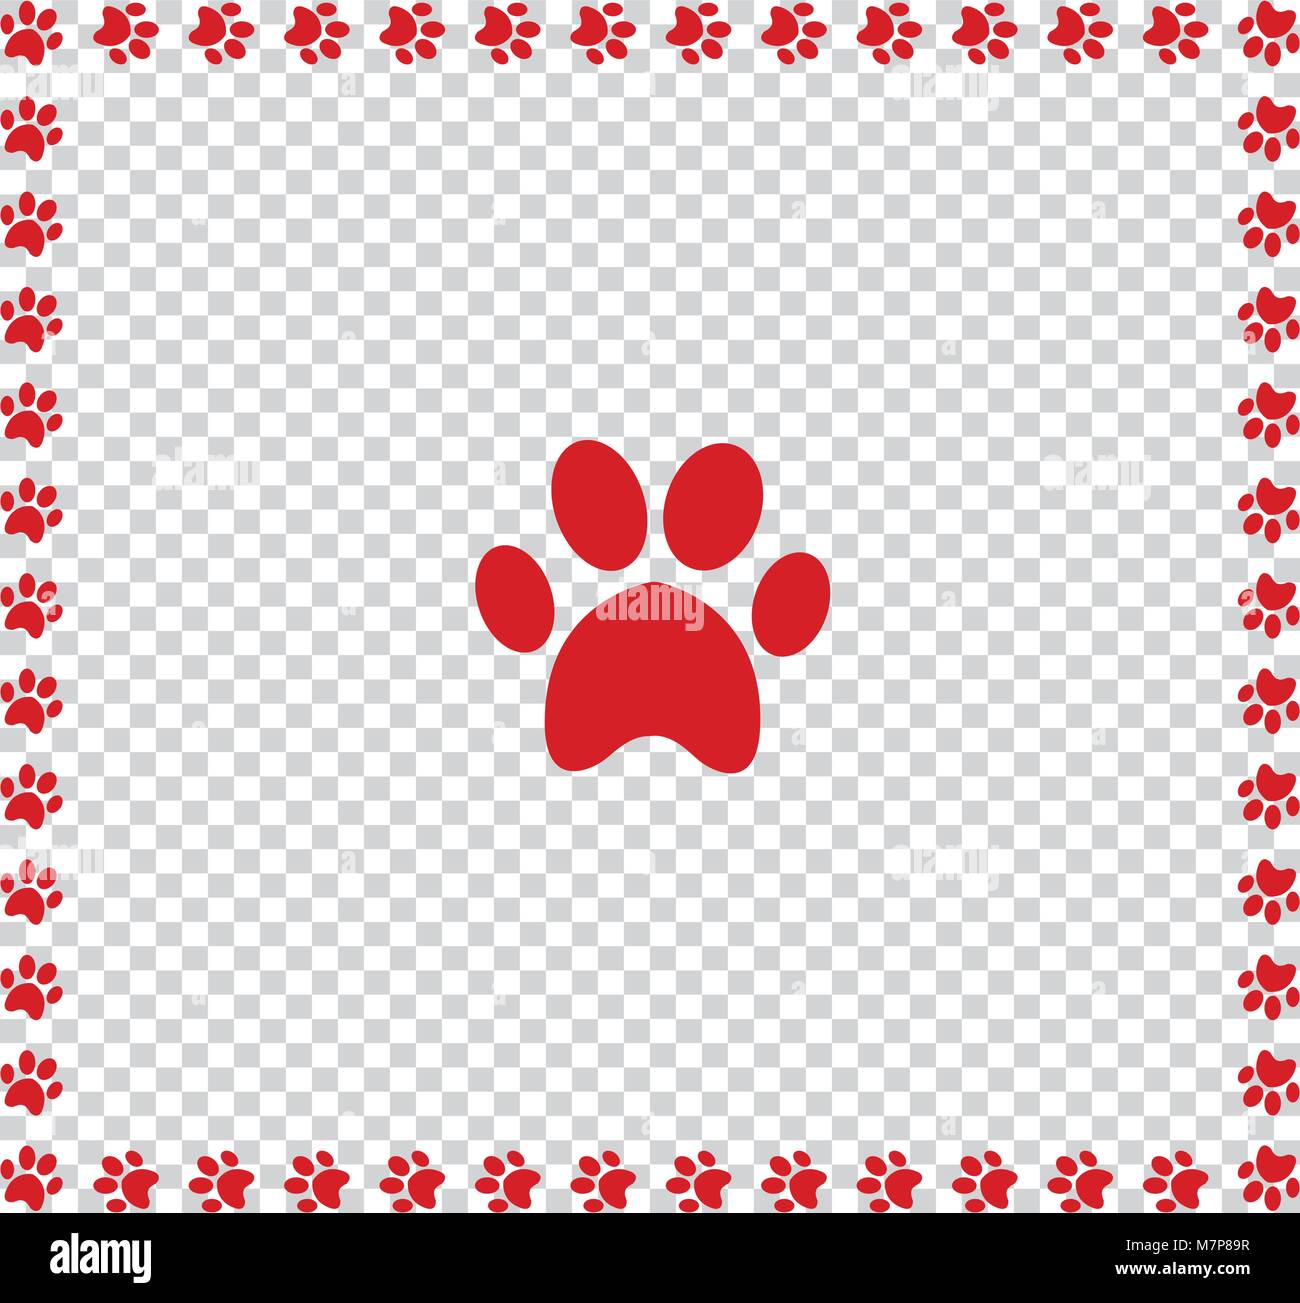 Red animals pawprint icon framed with paw prints square border